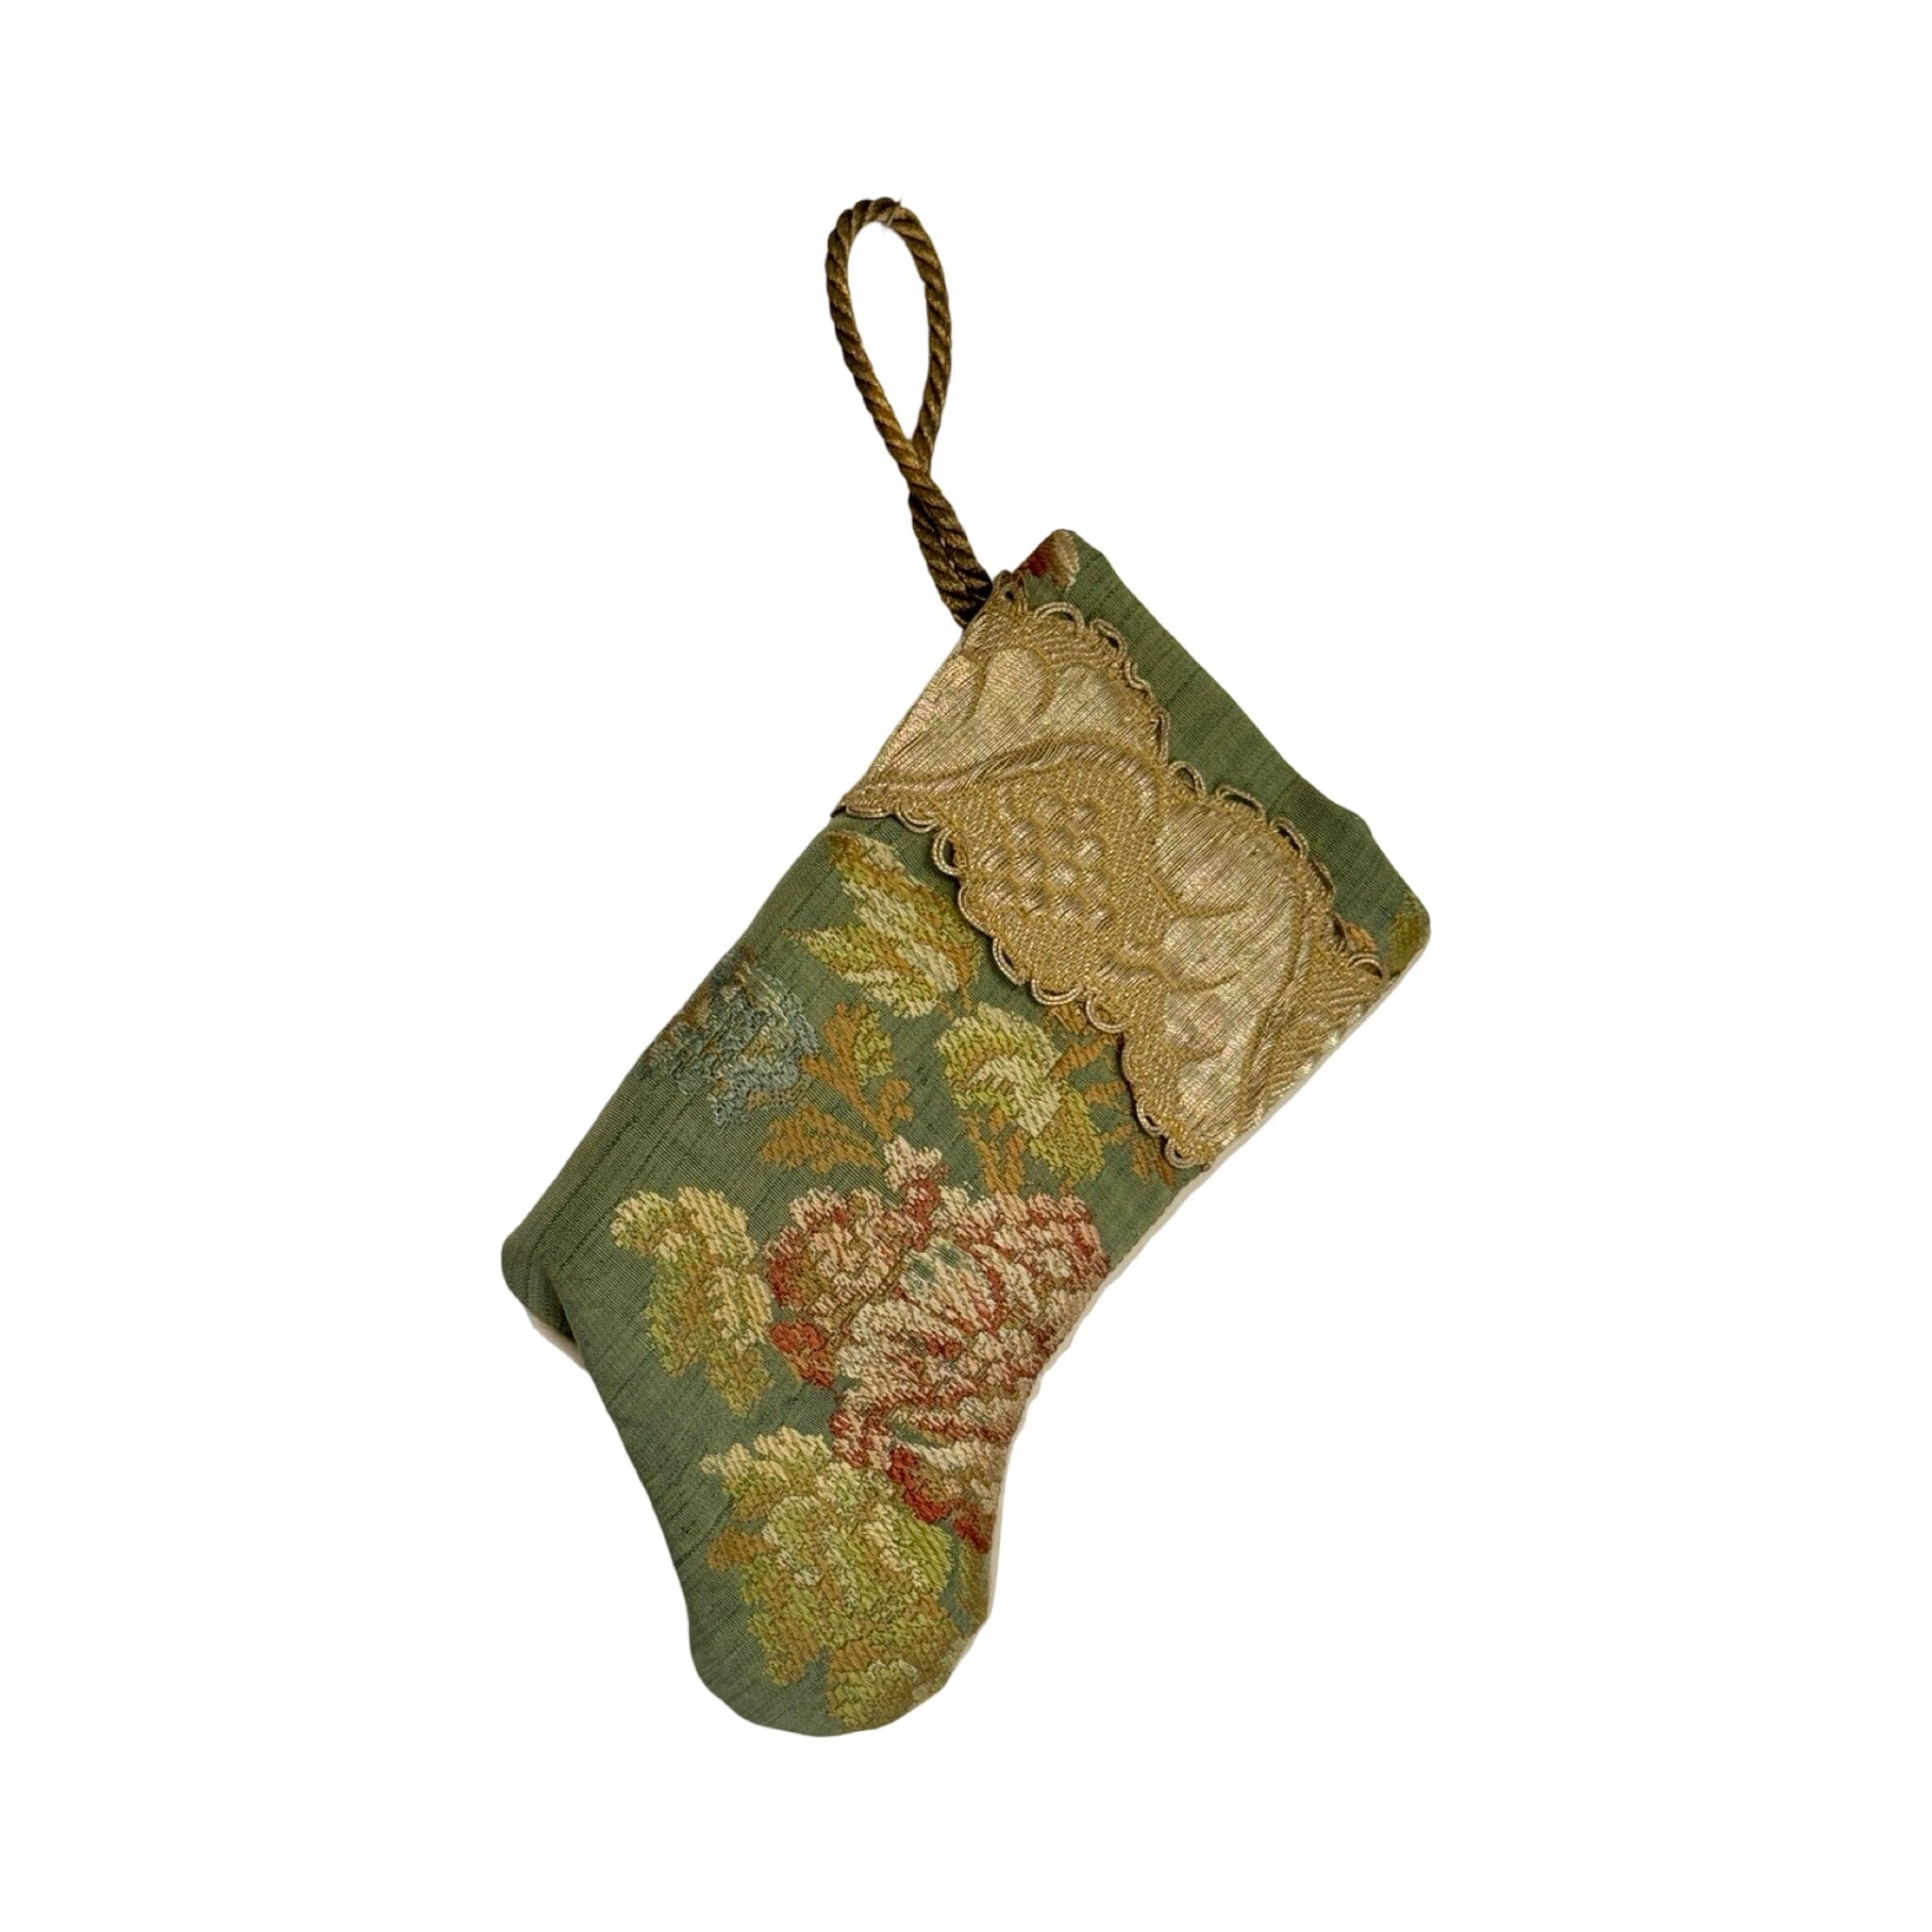 Handmade Mini Stocking Made From Vintage Fabric and Trims- Green Floral Ornament B. Viz Design K 